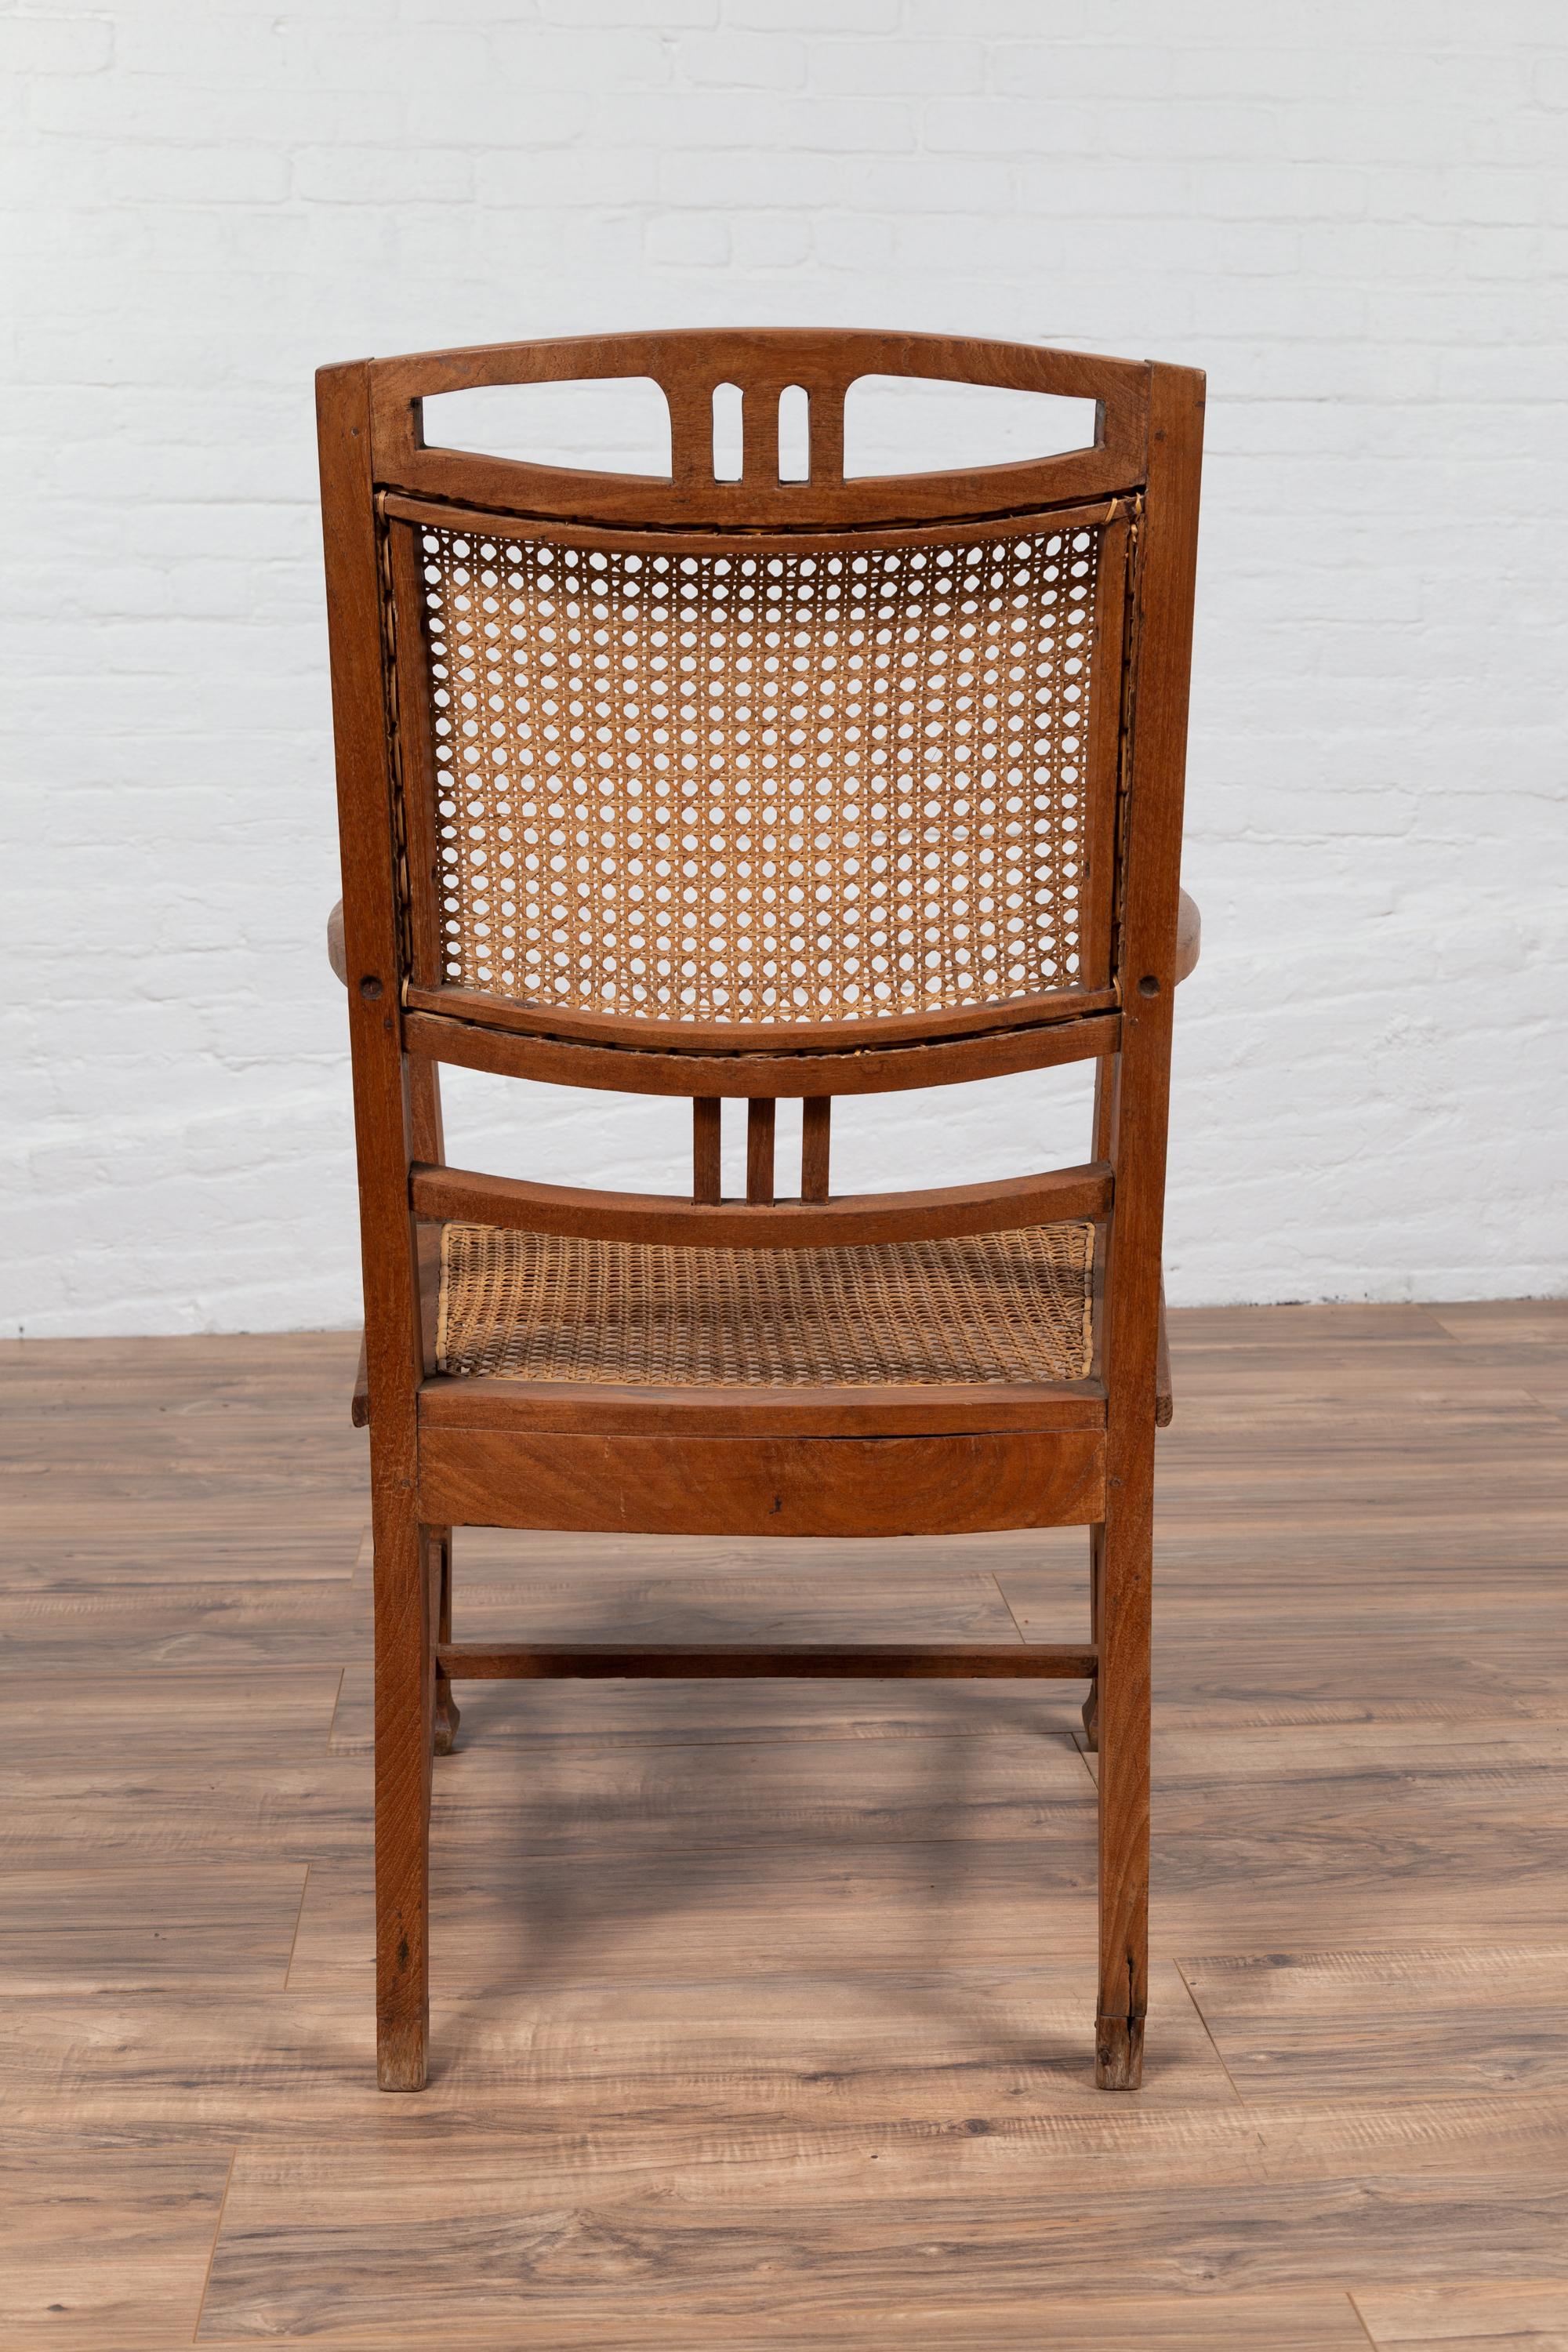 Dutch Colonial Javanese Teak Armchair with Rattan and Triglyph Inspired Motifs For Sale 6